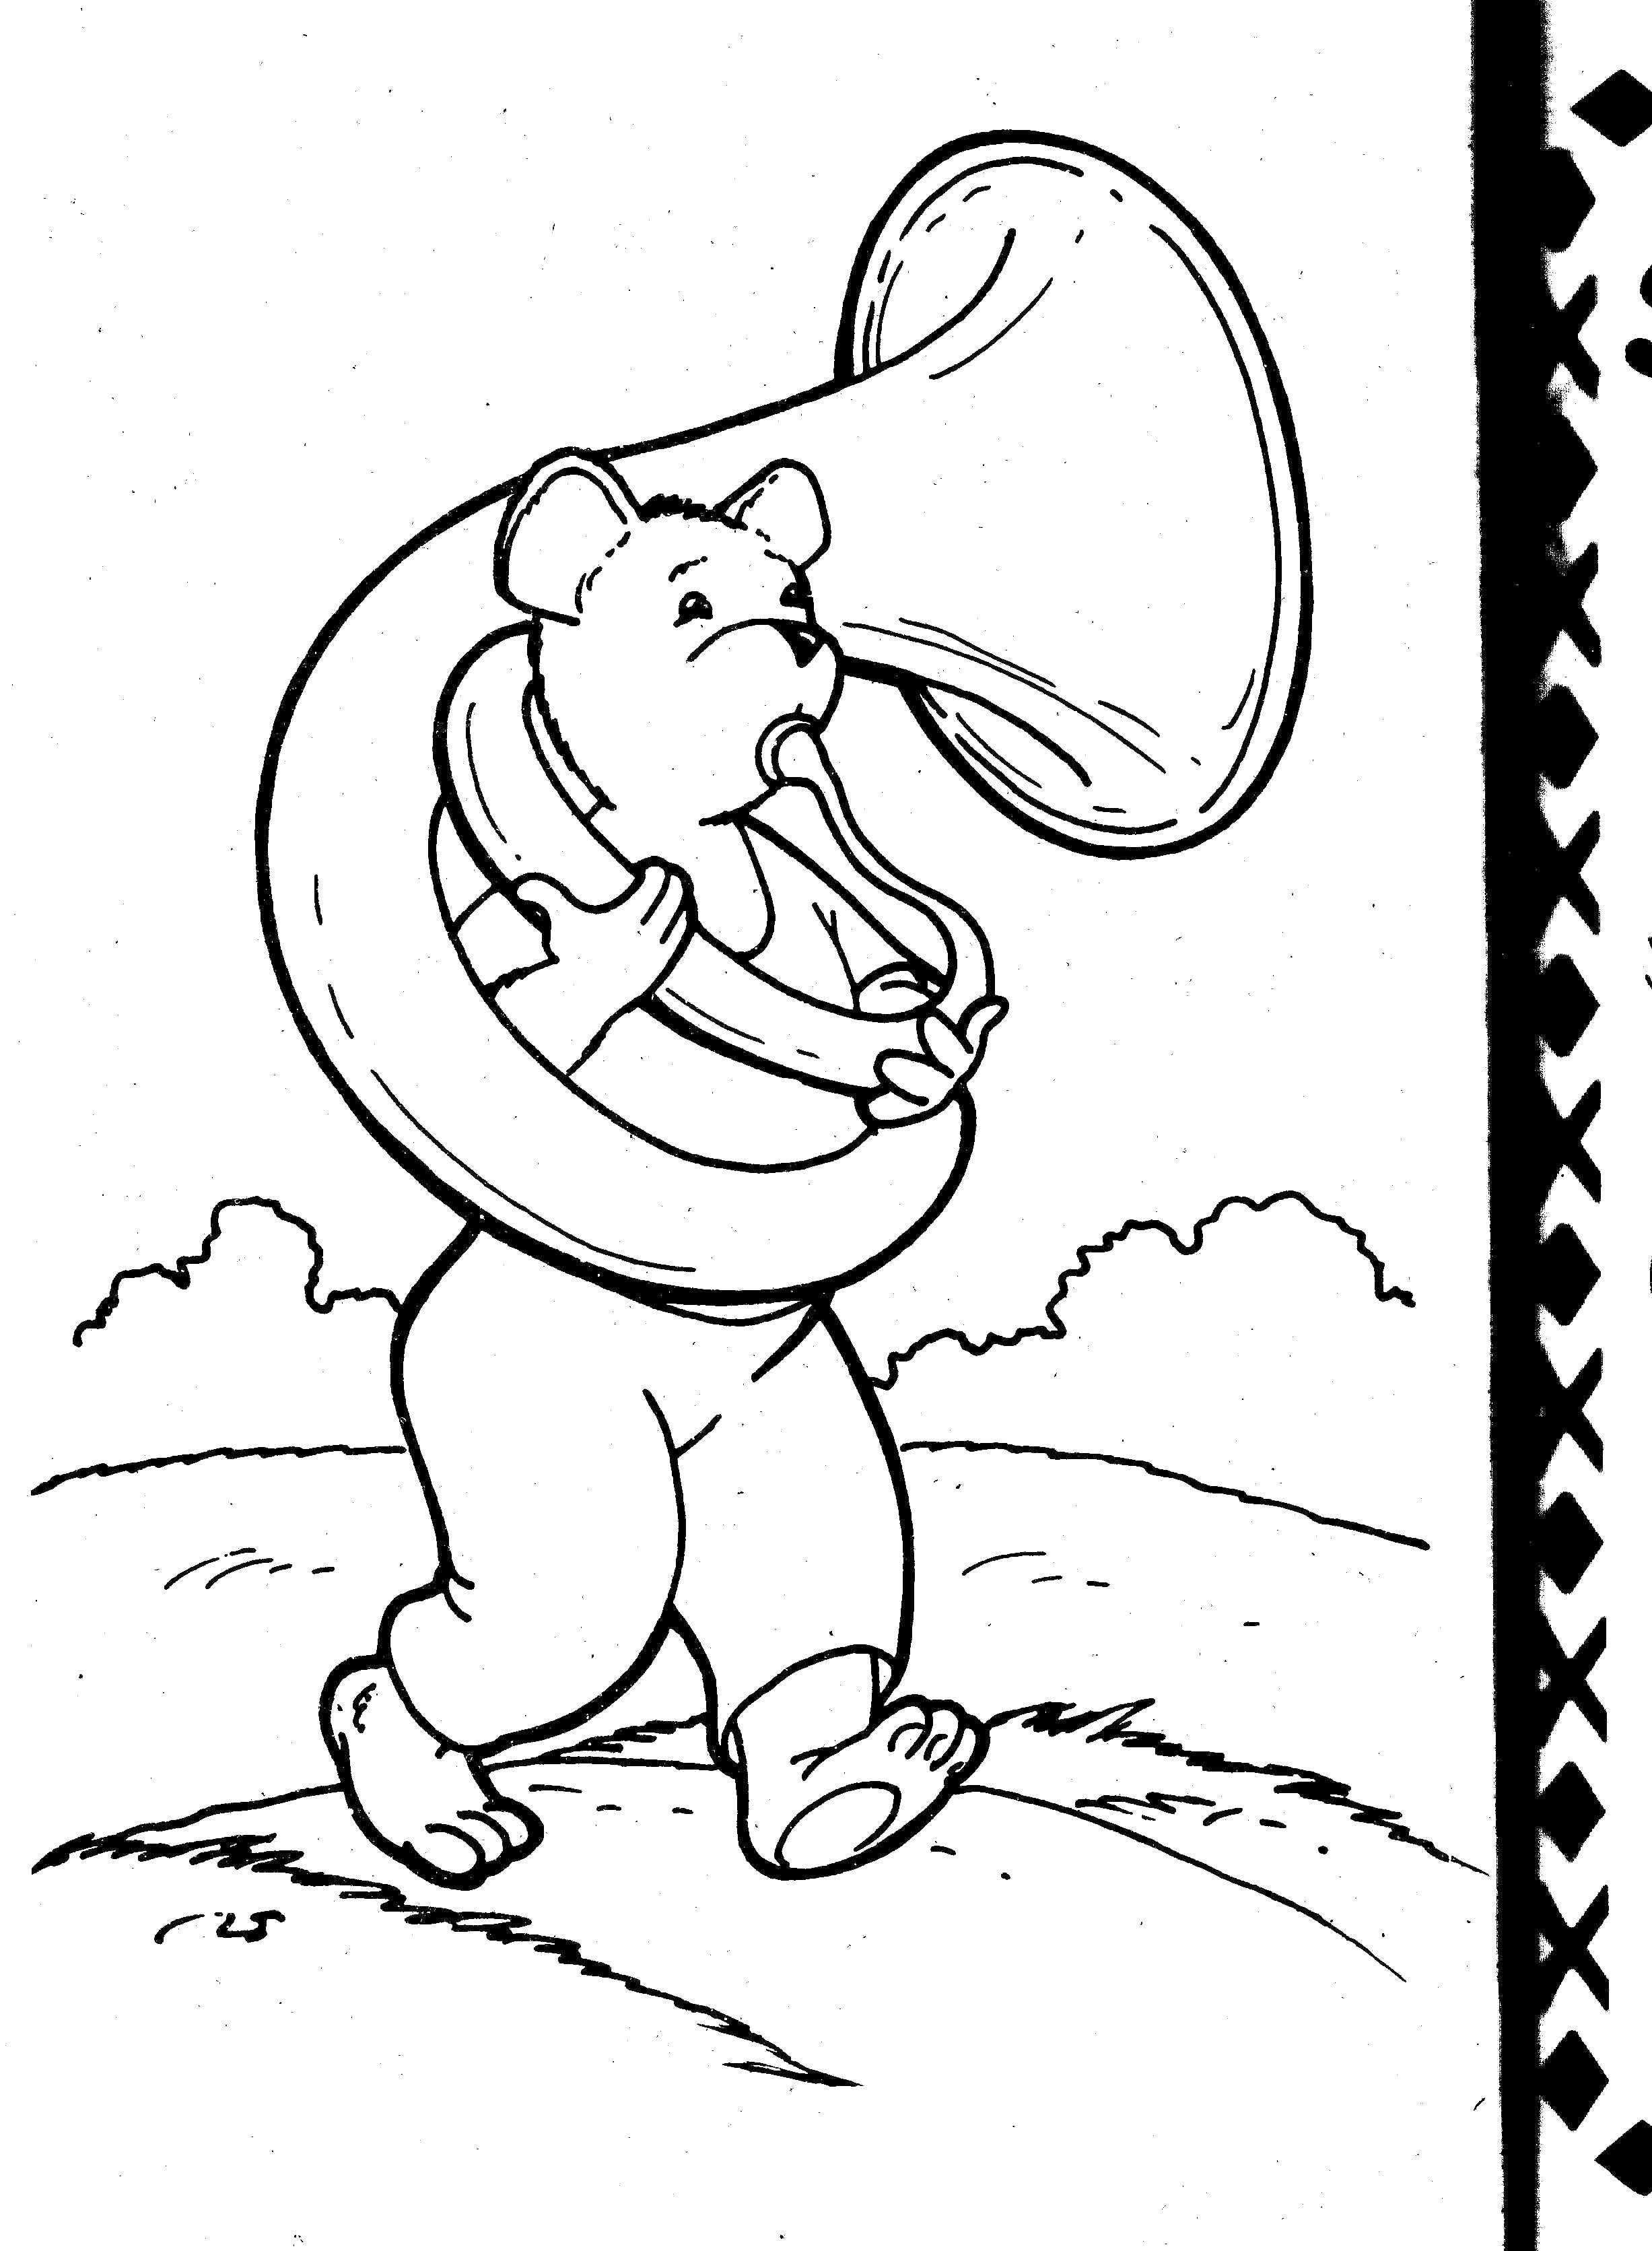 Coloring Mouse plays the trumpet. Category Music. Tags:  Music, instrument, musician, note.